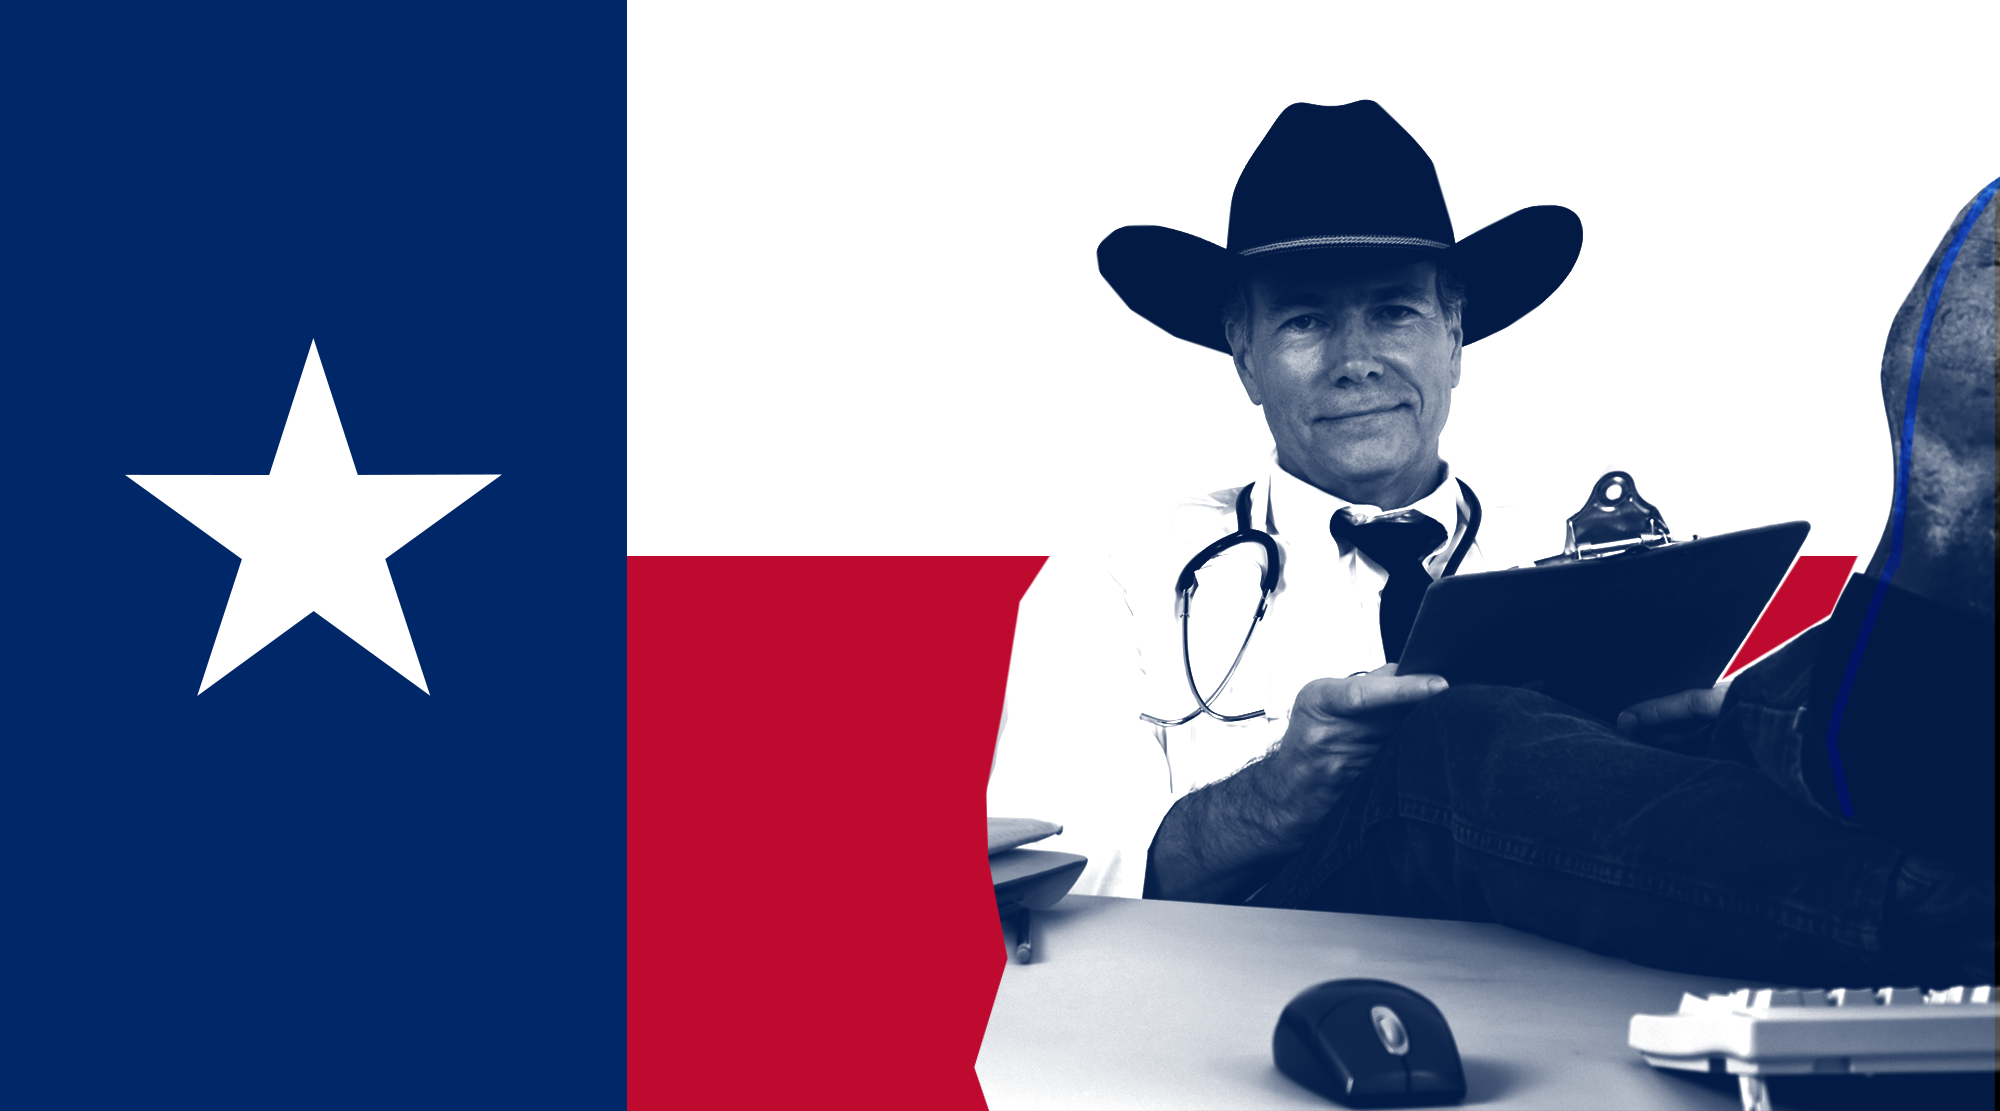 A physician wearing a cowboy hat, sitting in front of the Texas state flag.